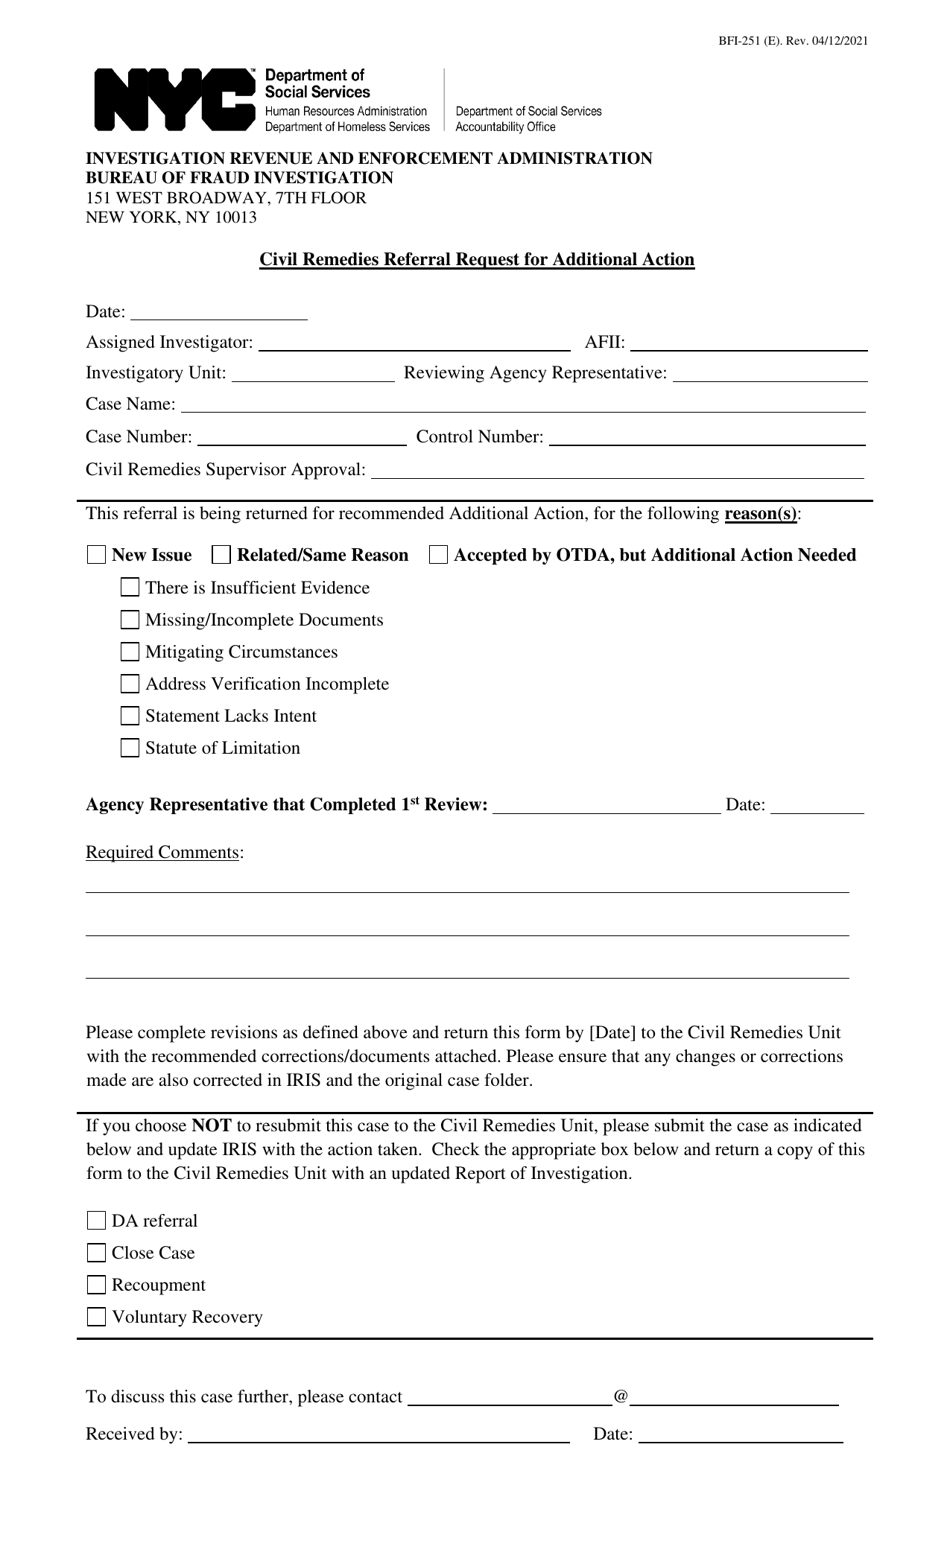 Form BFI-251 Civil Remedies Referral Request for Additional Action - New York City, Page 1